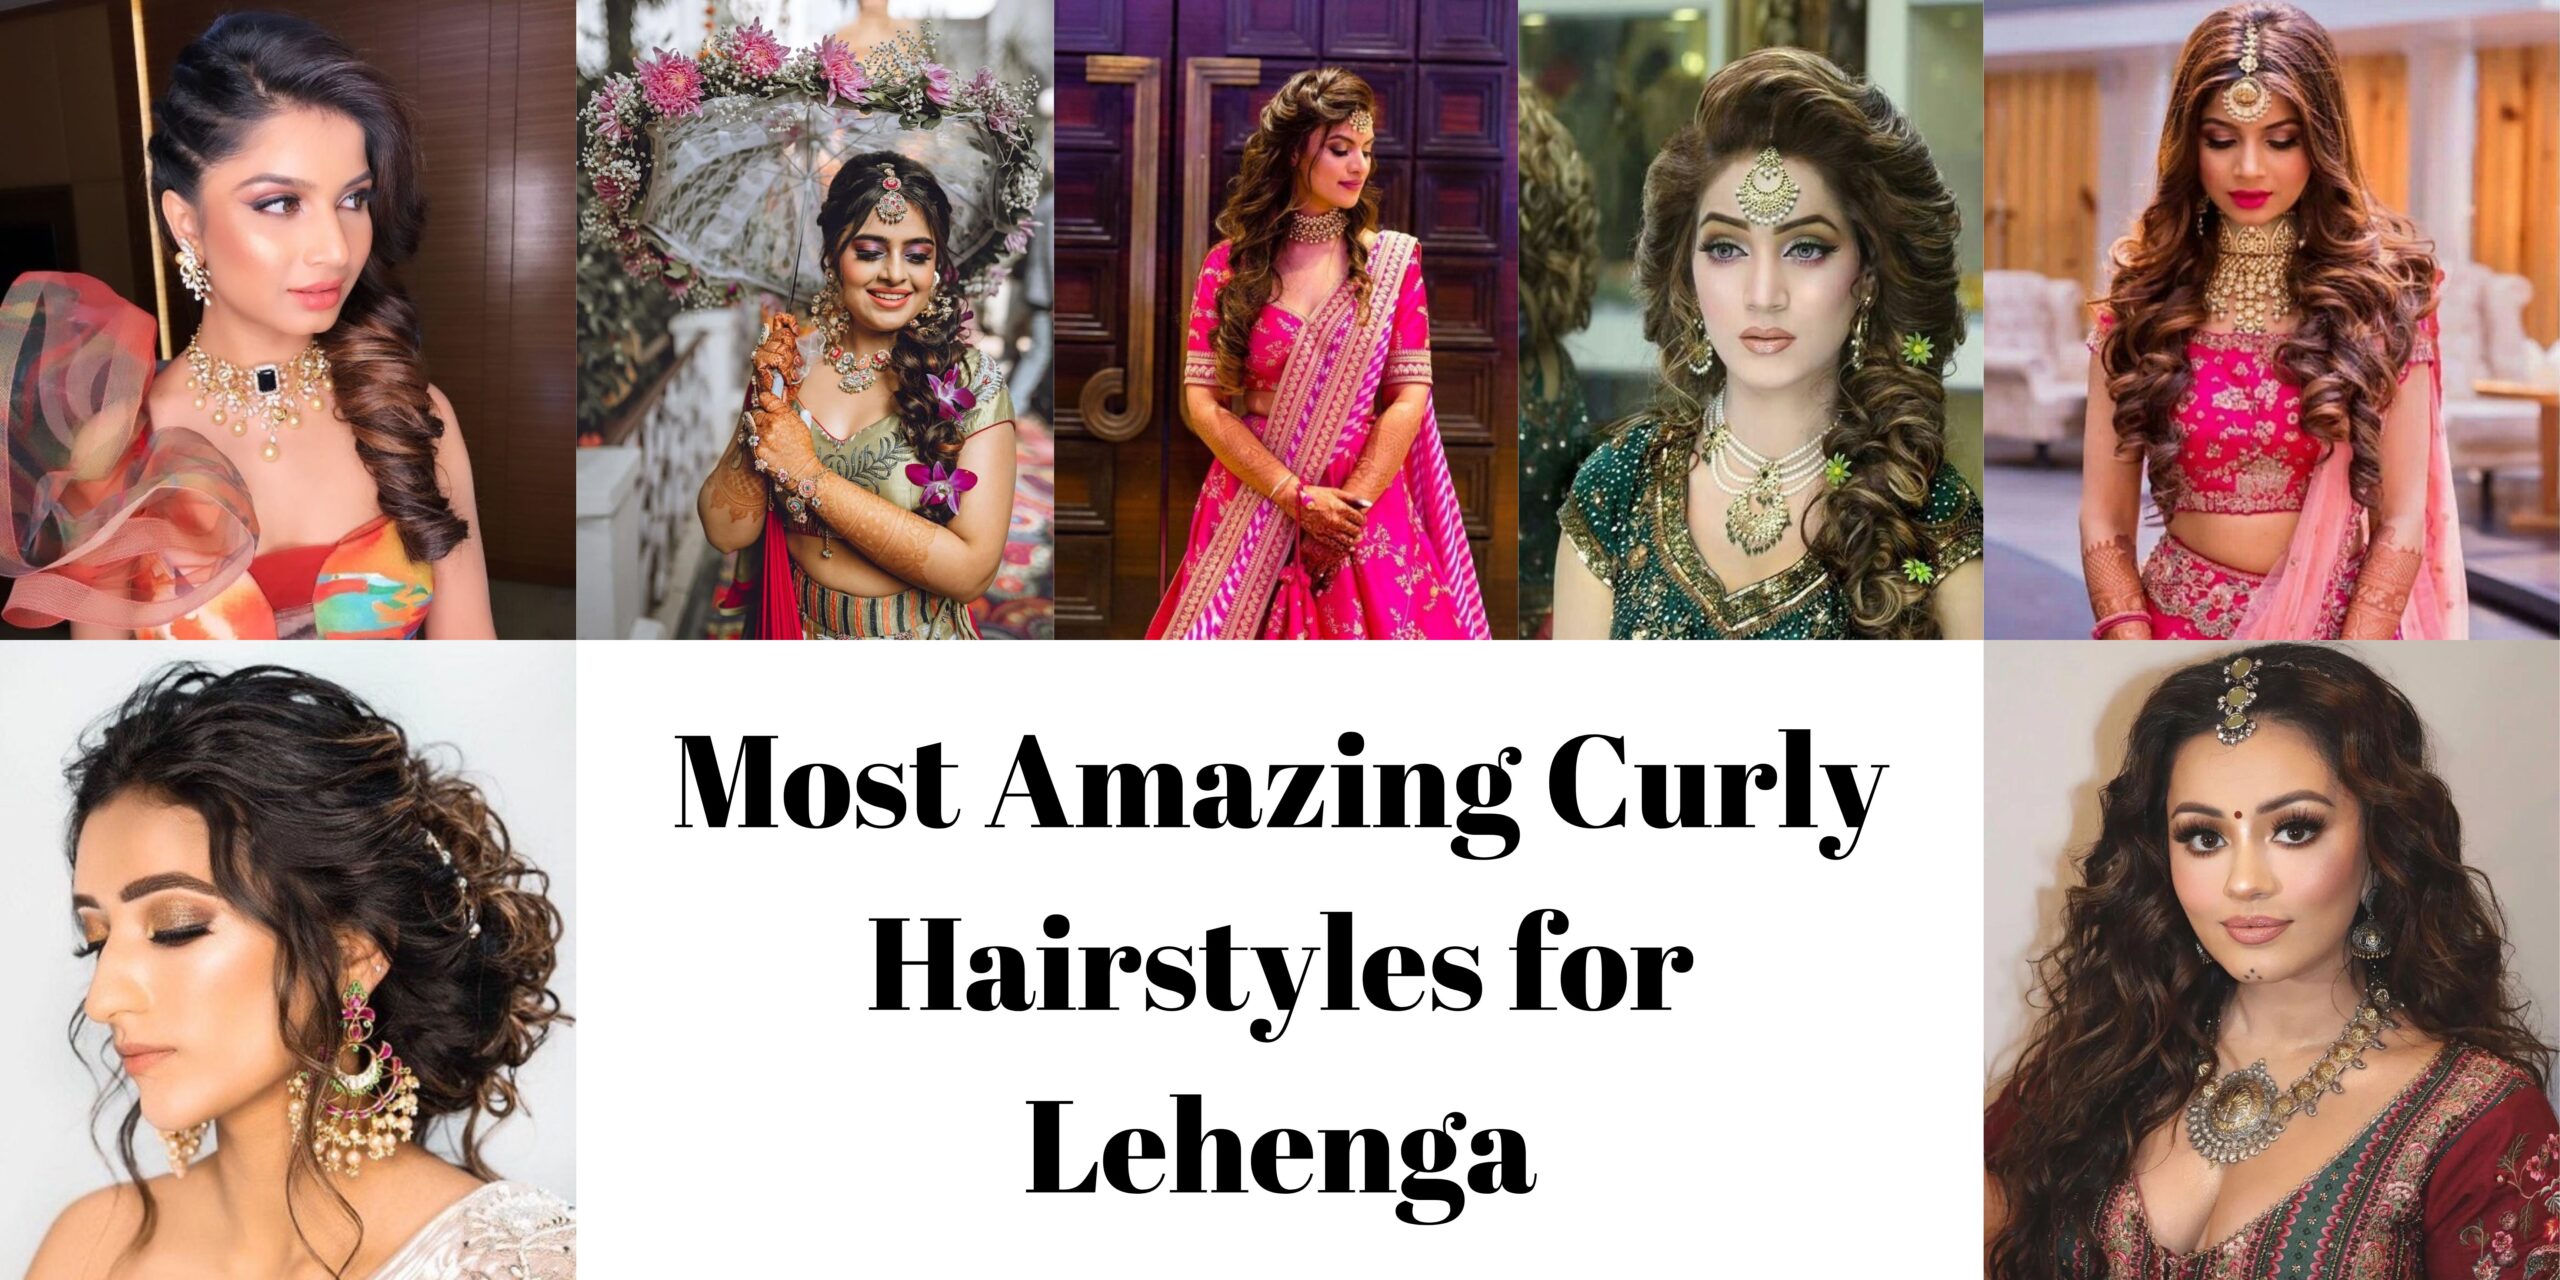 What should the hairstyle be when wearing lengha? - Quora